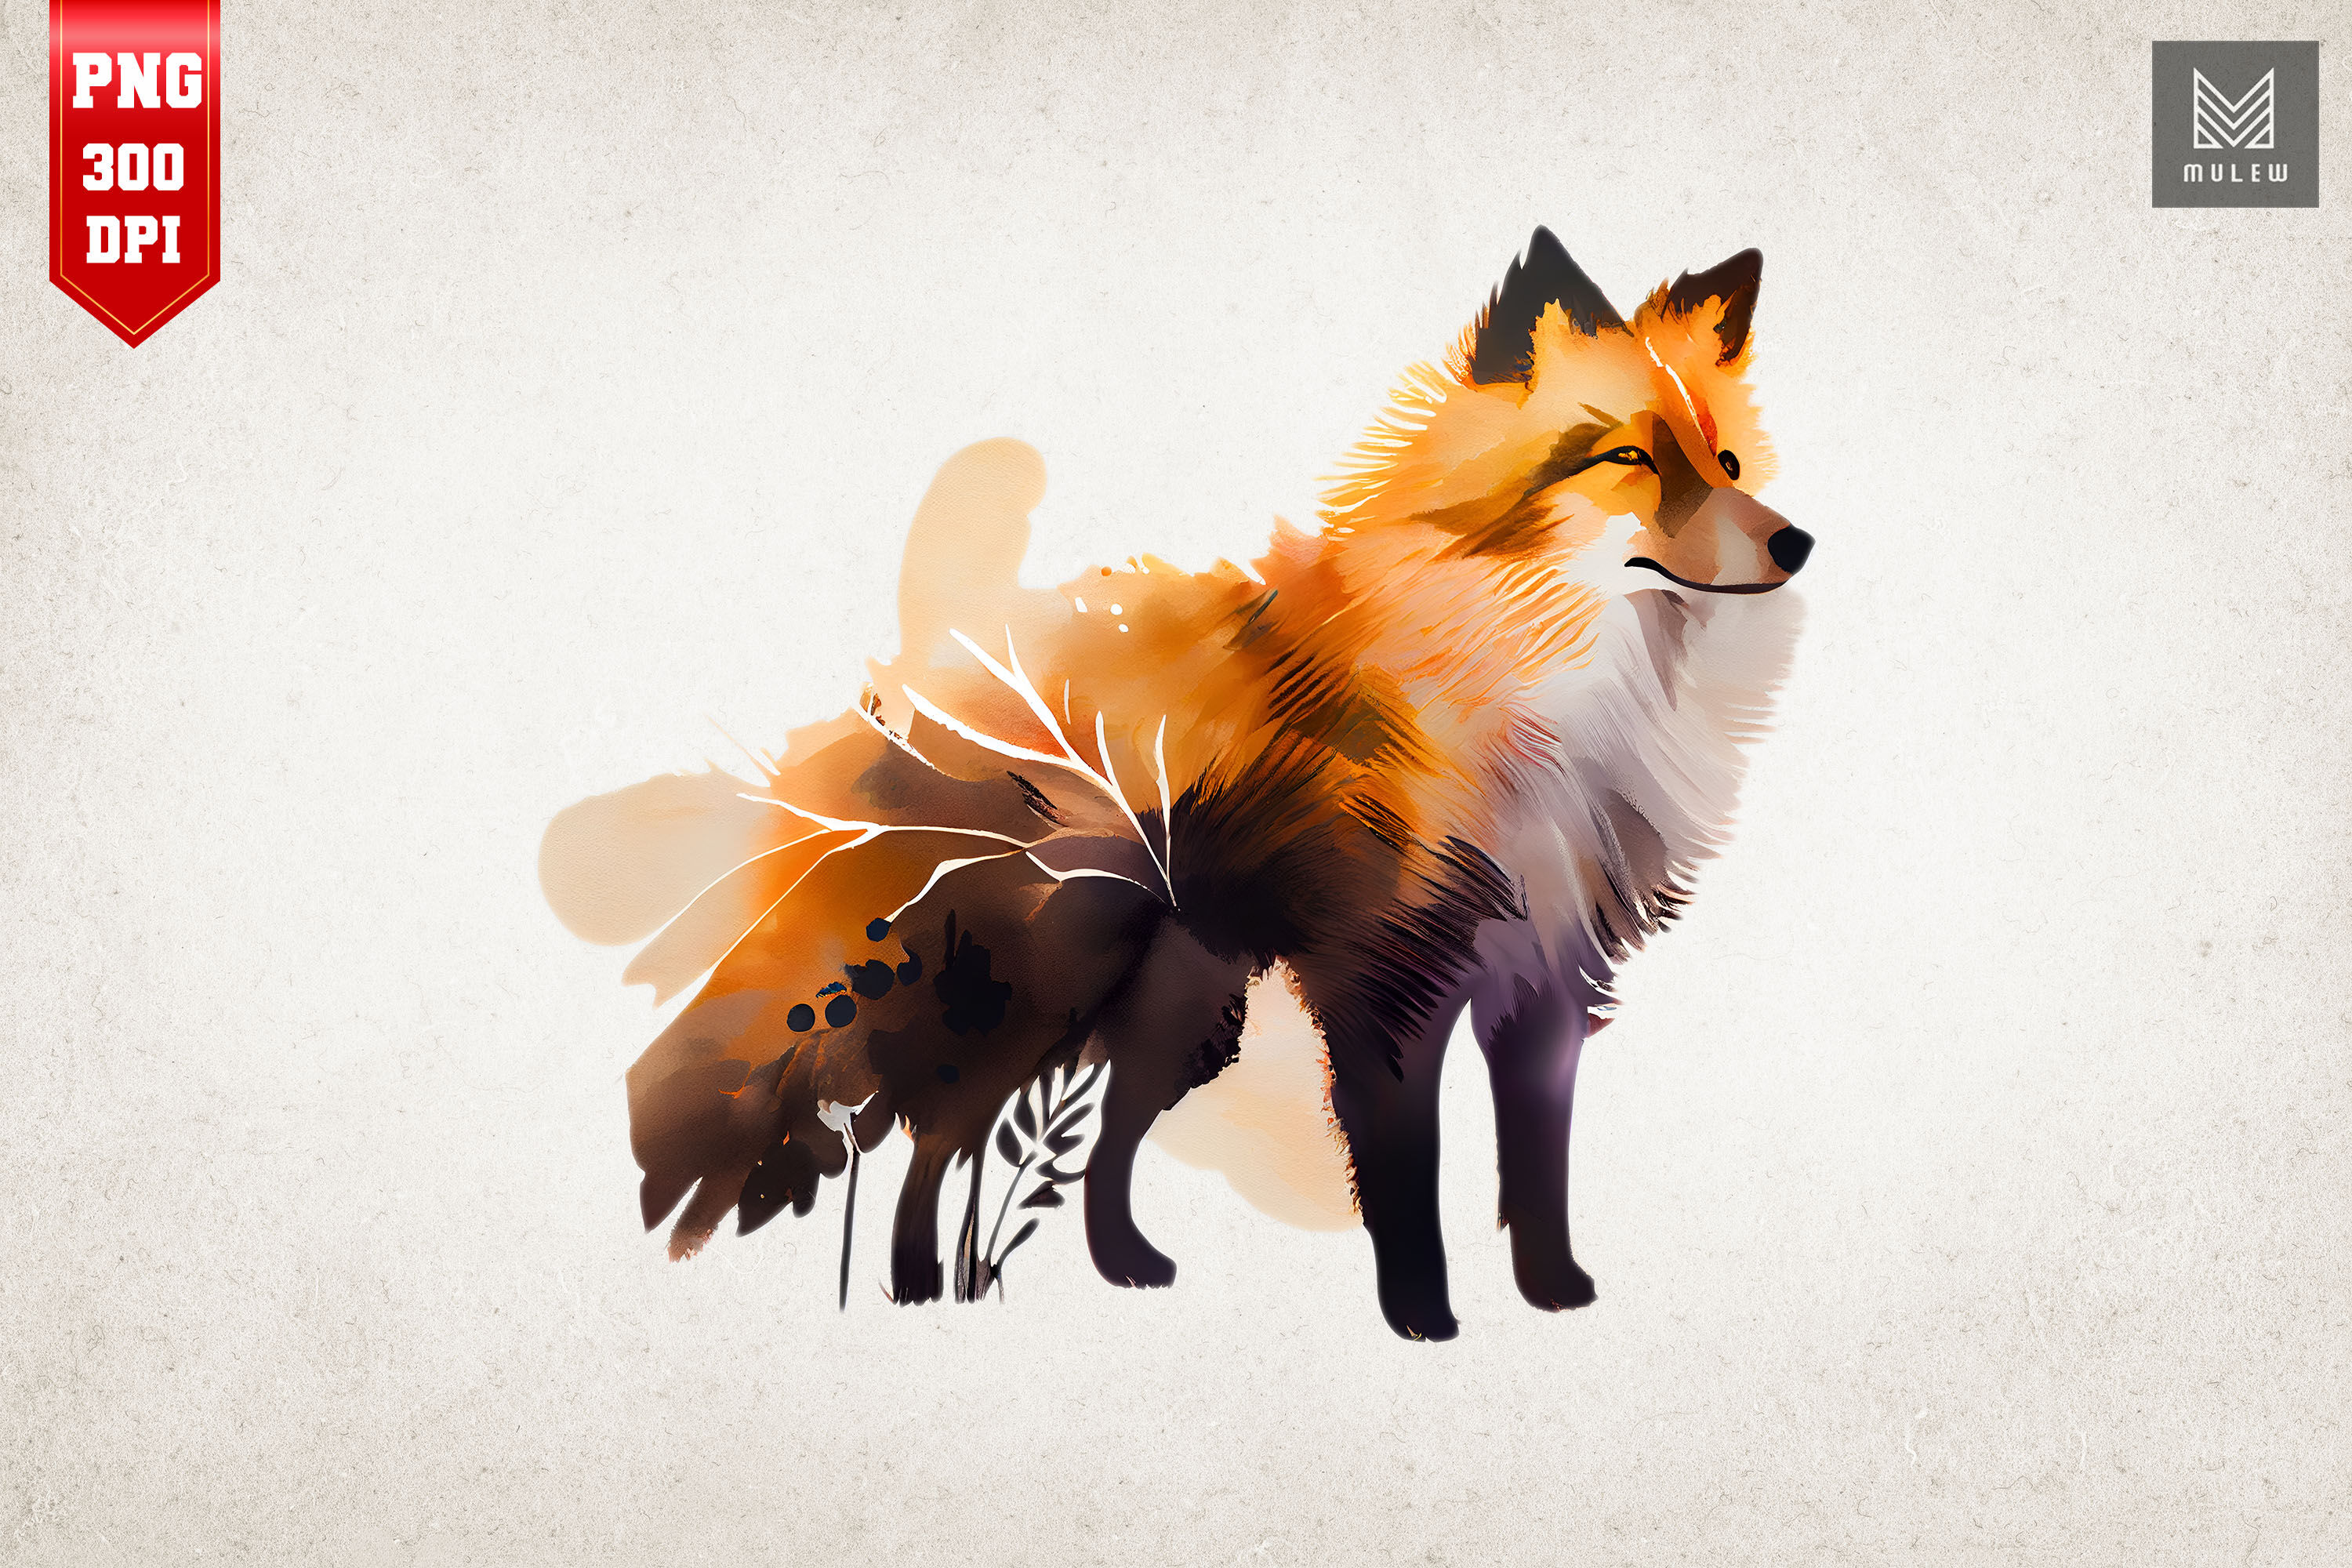 How To Draw An Easy Fox, Step by Step, Drawing Guide, by Fridgey - DragoArt